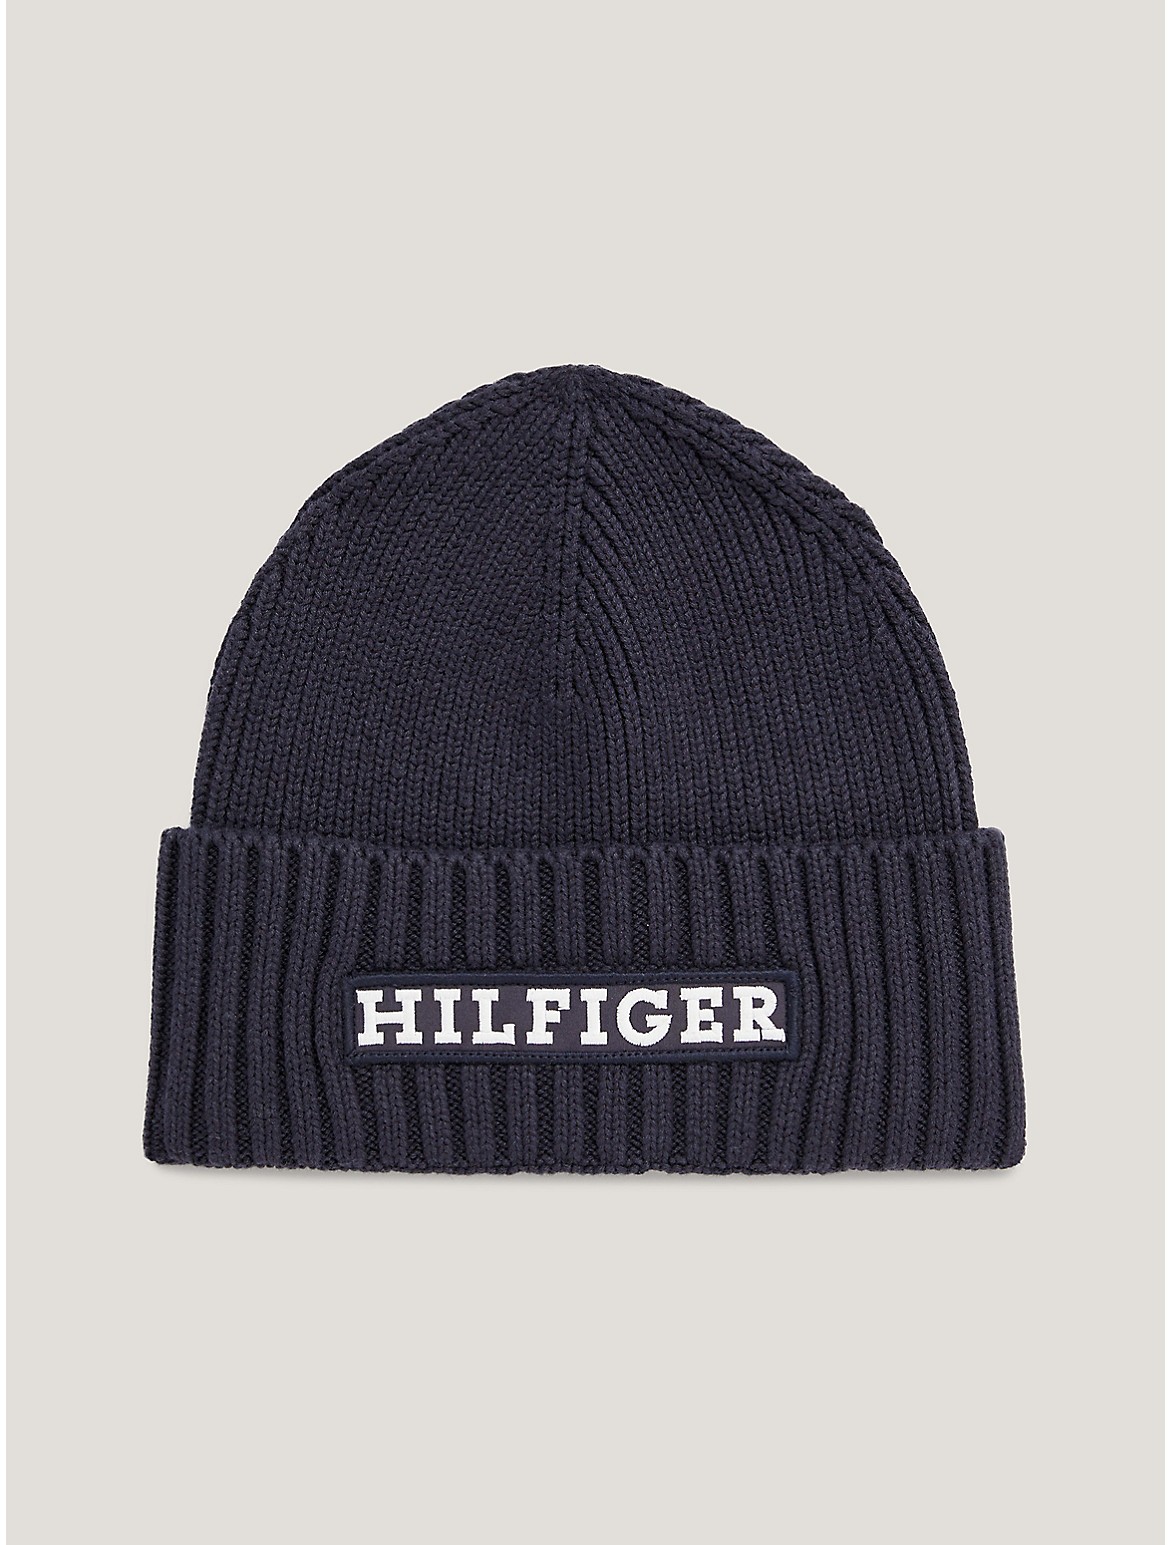 TOMMY HILFIGER EMBROIDERED MONOTYPE LOGO BEANIE